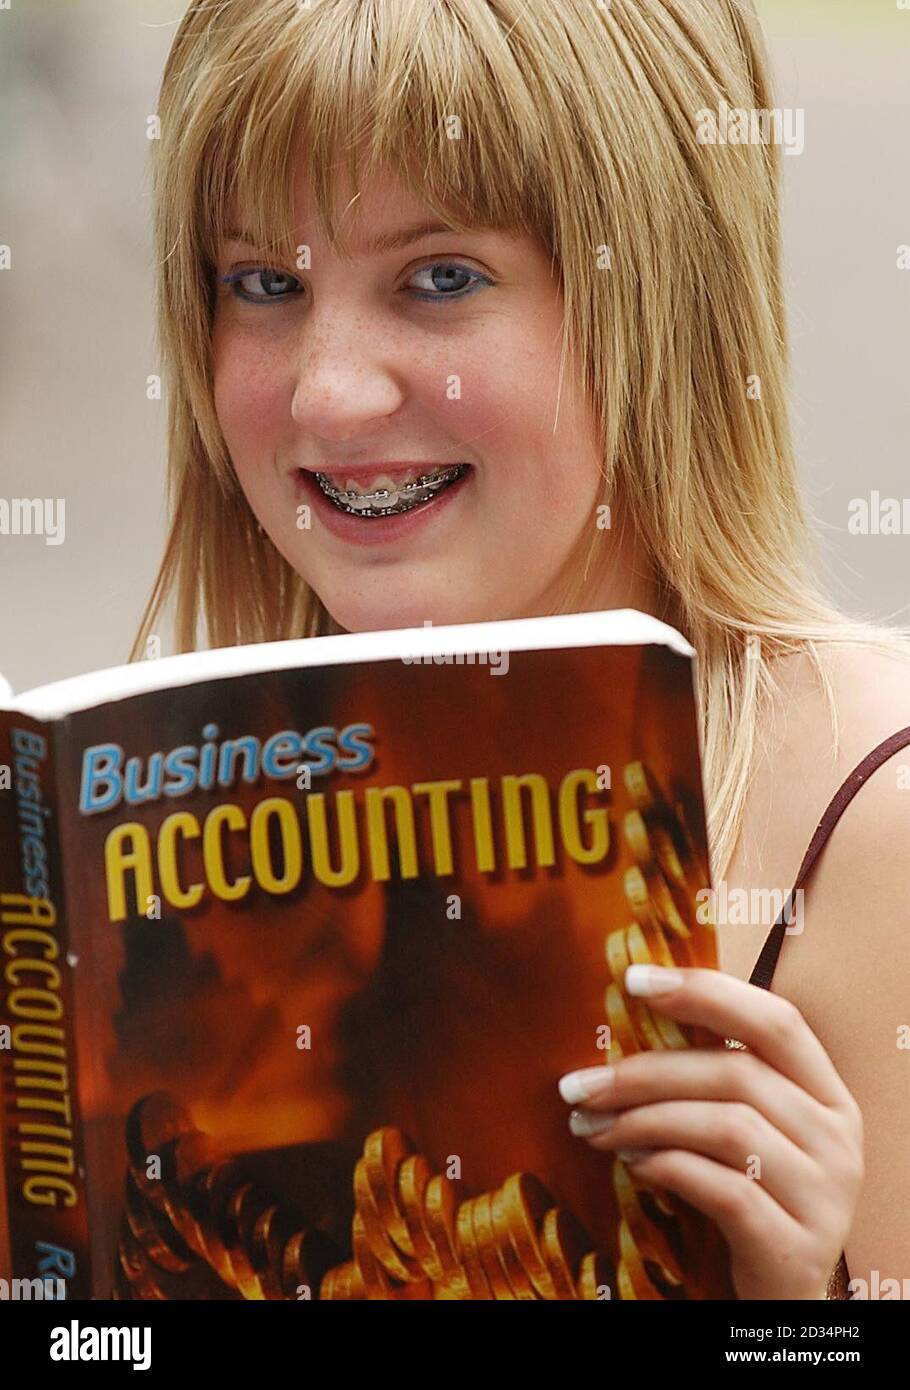 Aspiring accountant Emma McDowall, 17, who has been named as the first recipient of a scholarship set up in memory of one of the victims of the July 7 bombings in London, reads a textbook at Lockerbie Academy. Stock Photo